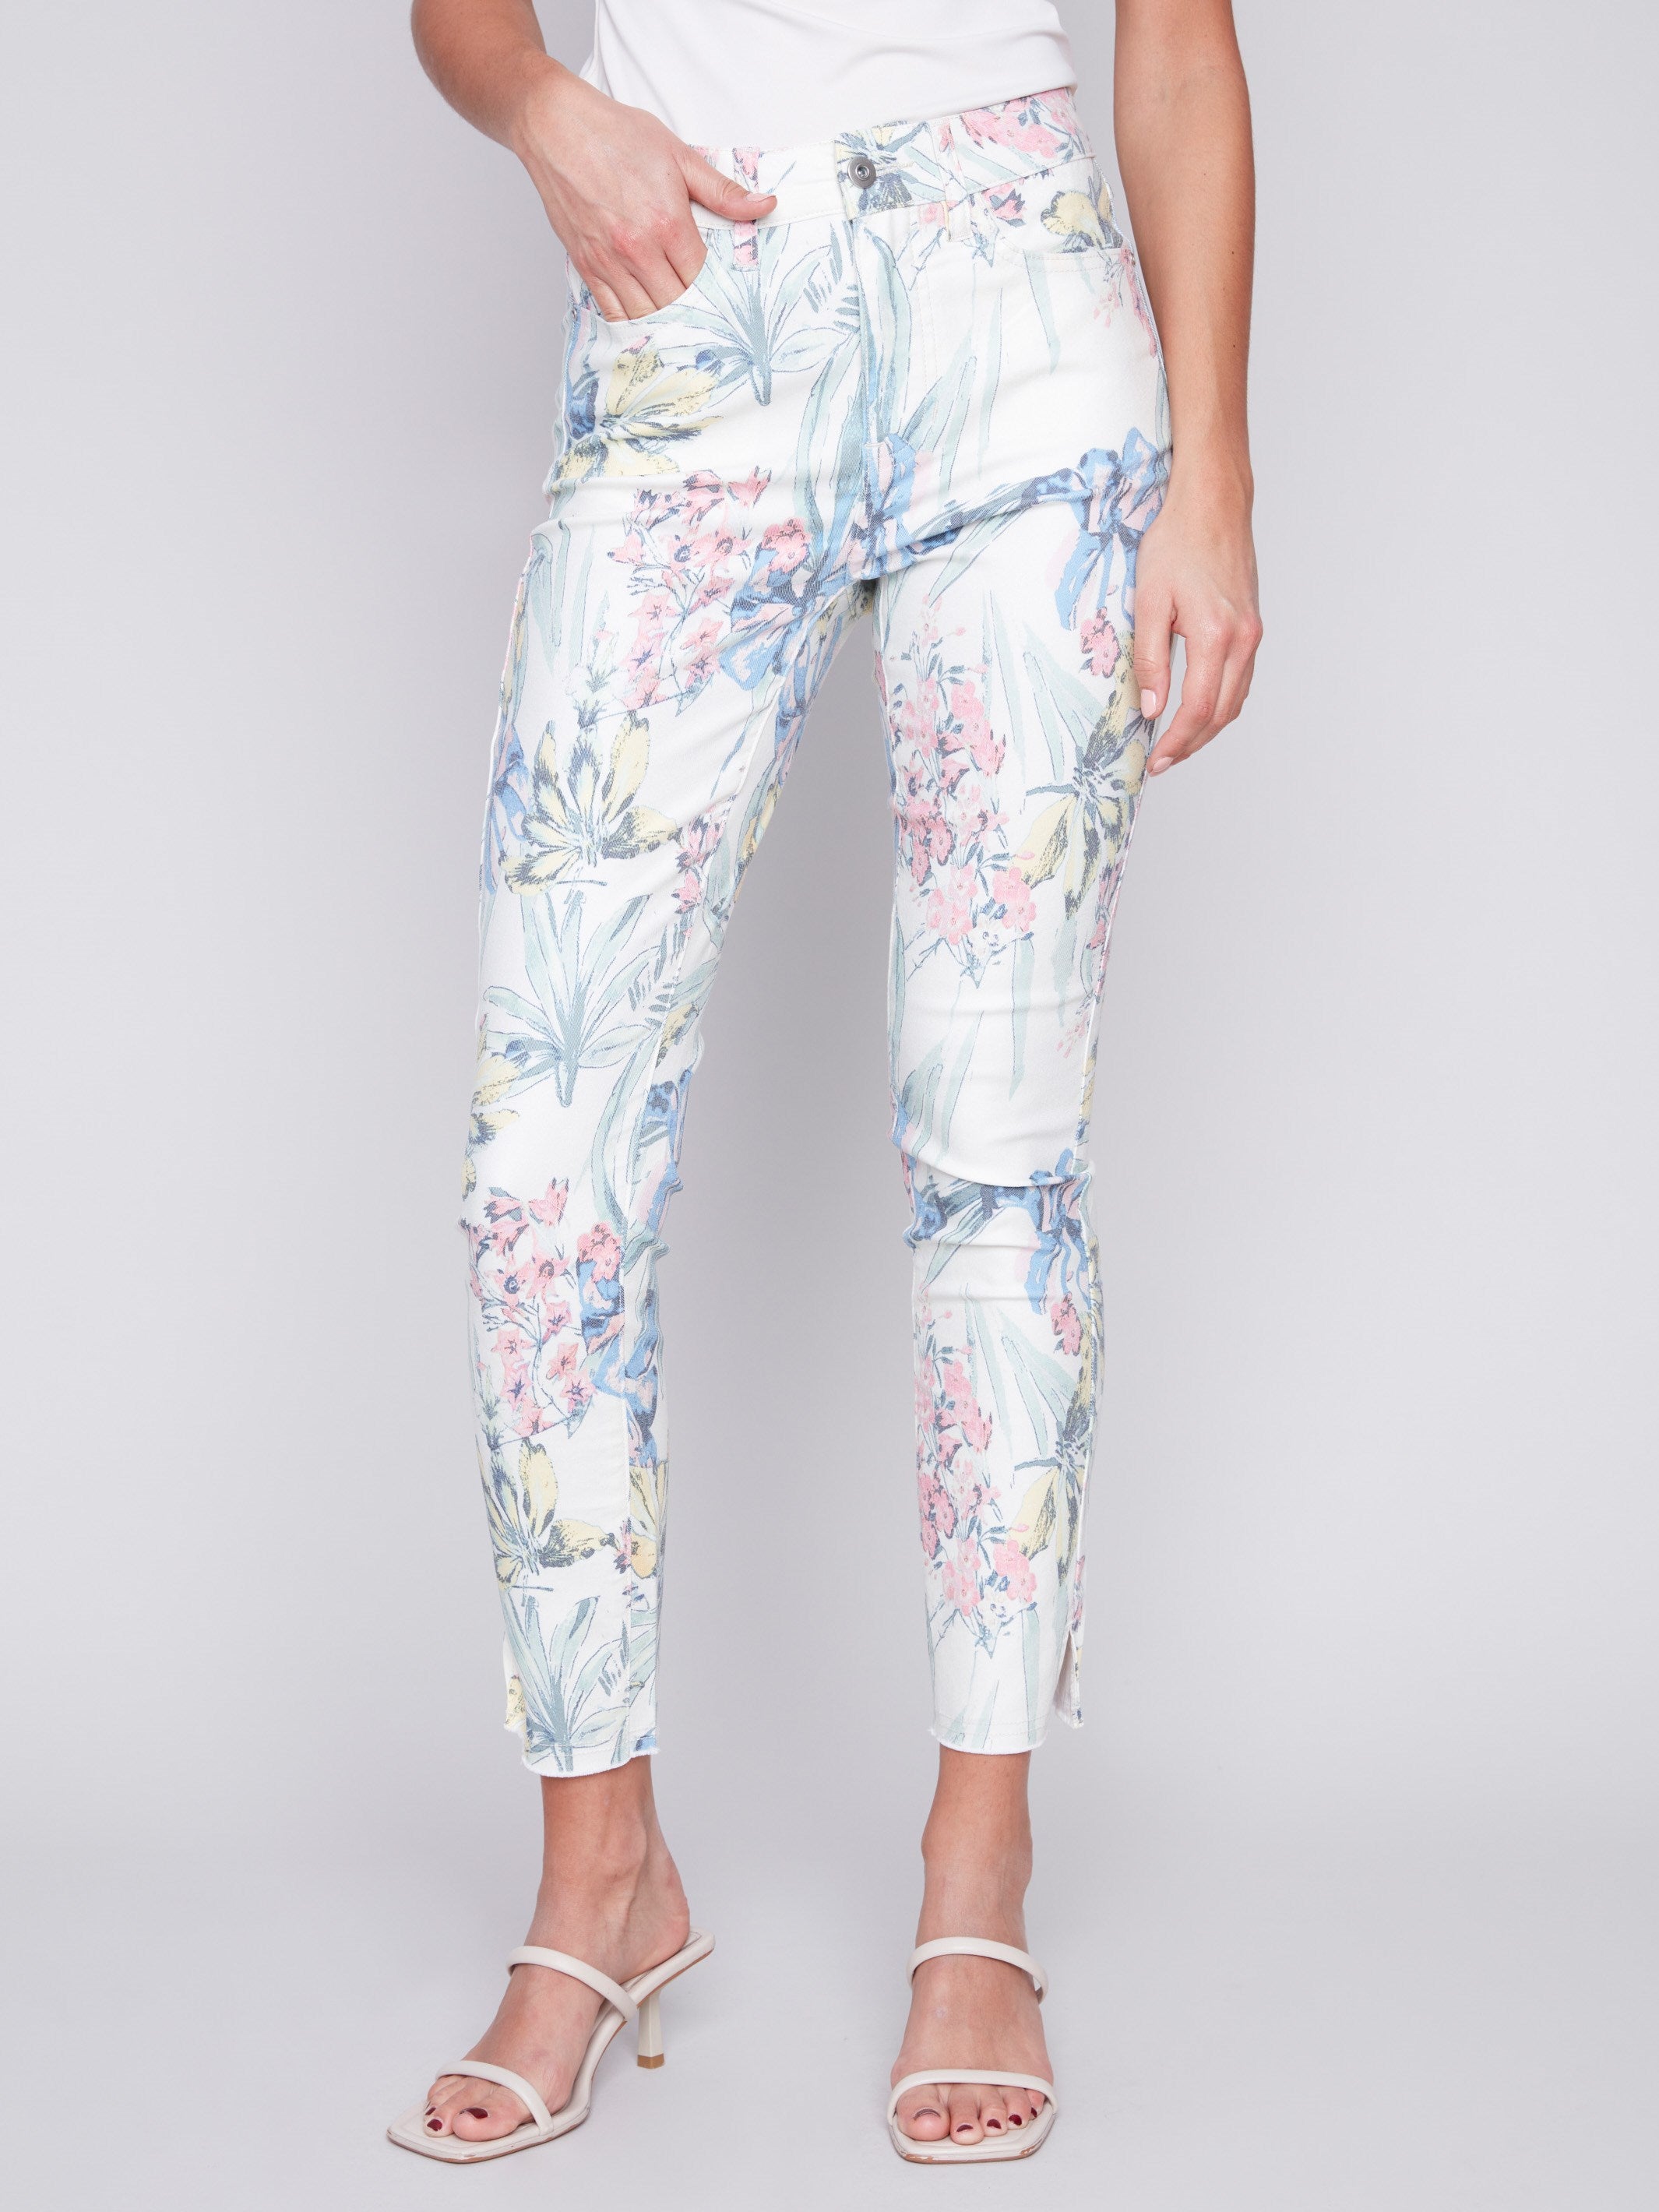 Printed Twill Pants with Hem Slit - Hawaii - Charlie B Collection Canada - Image 2